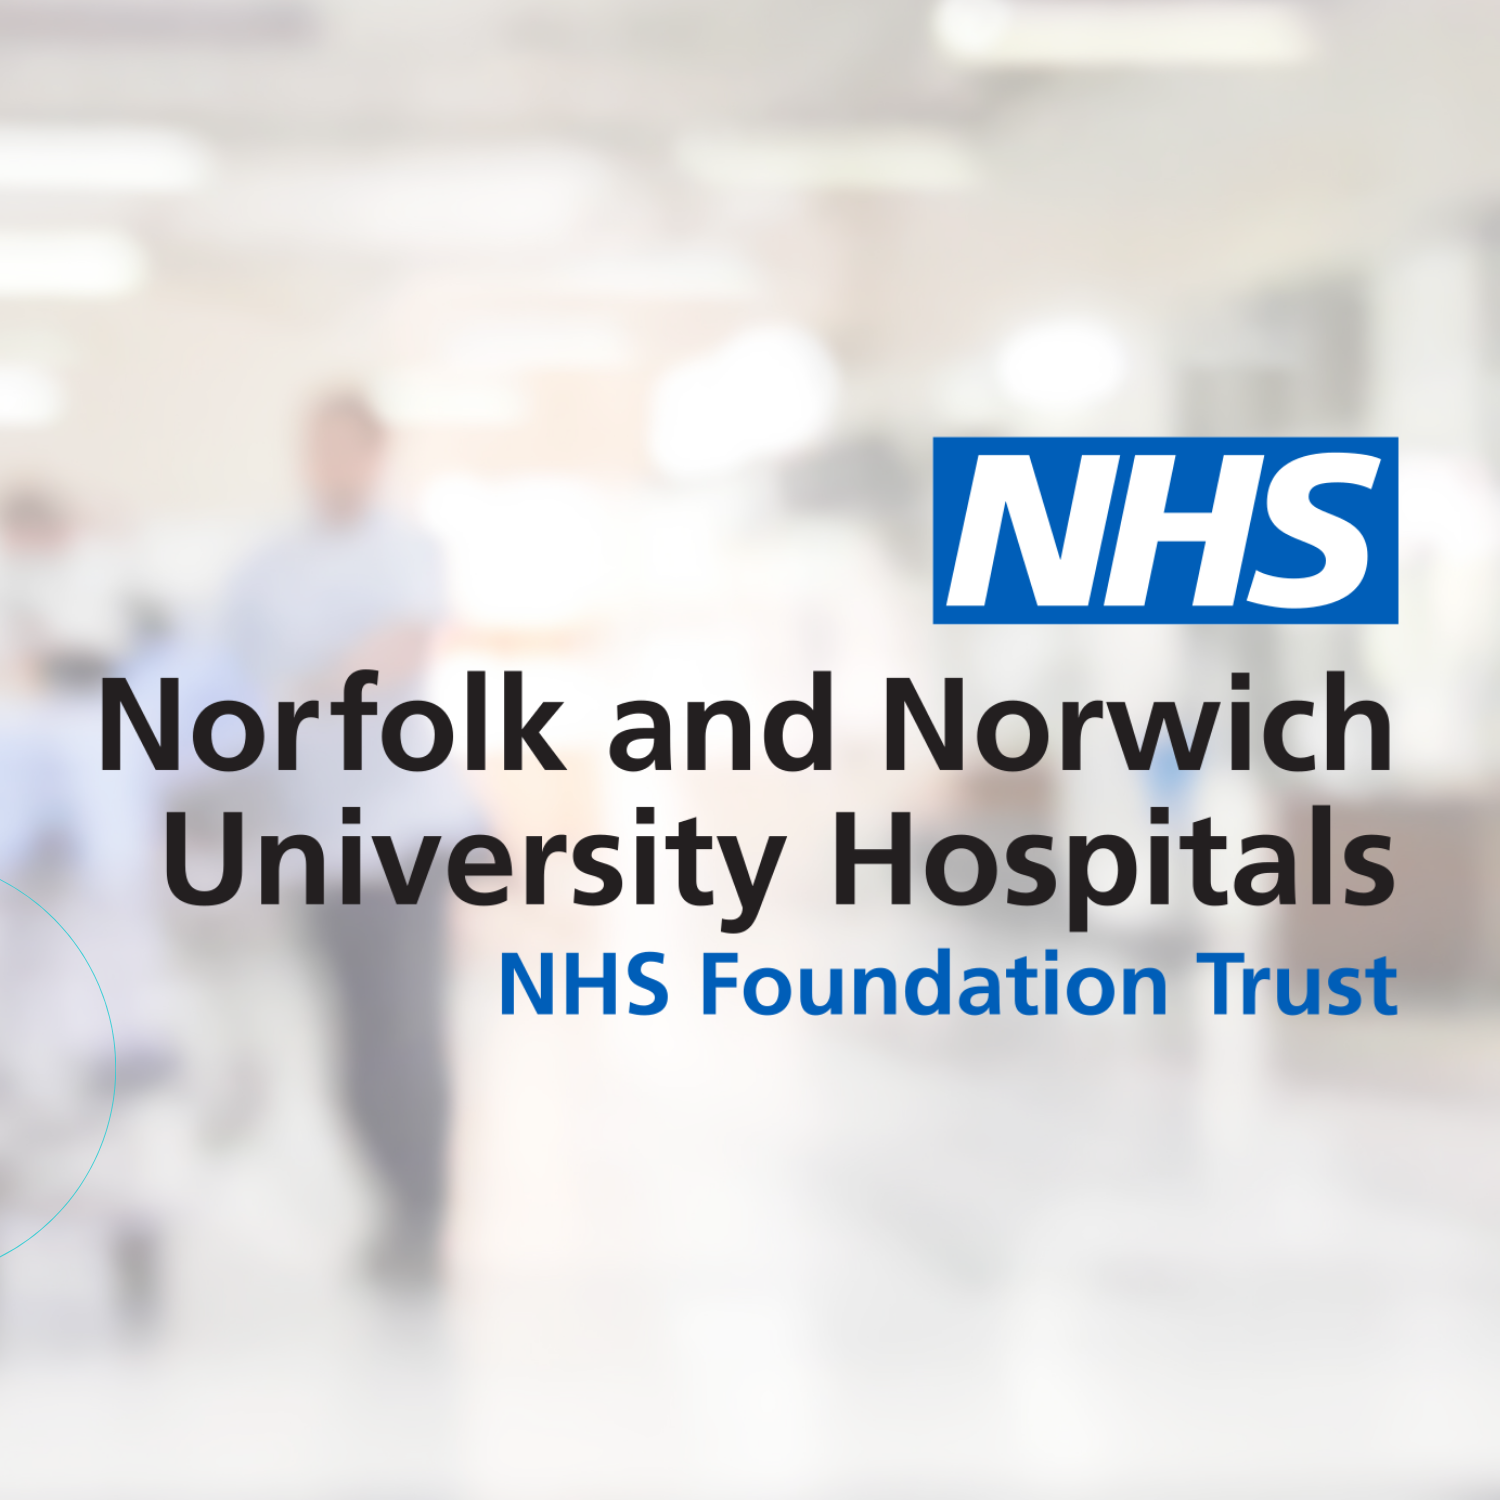 Personalised follow-ups at Norfolk and Norwich saves 29,000 outpatients appointments in one year